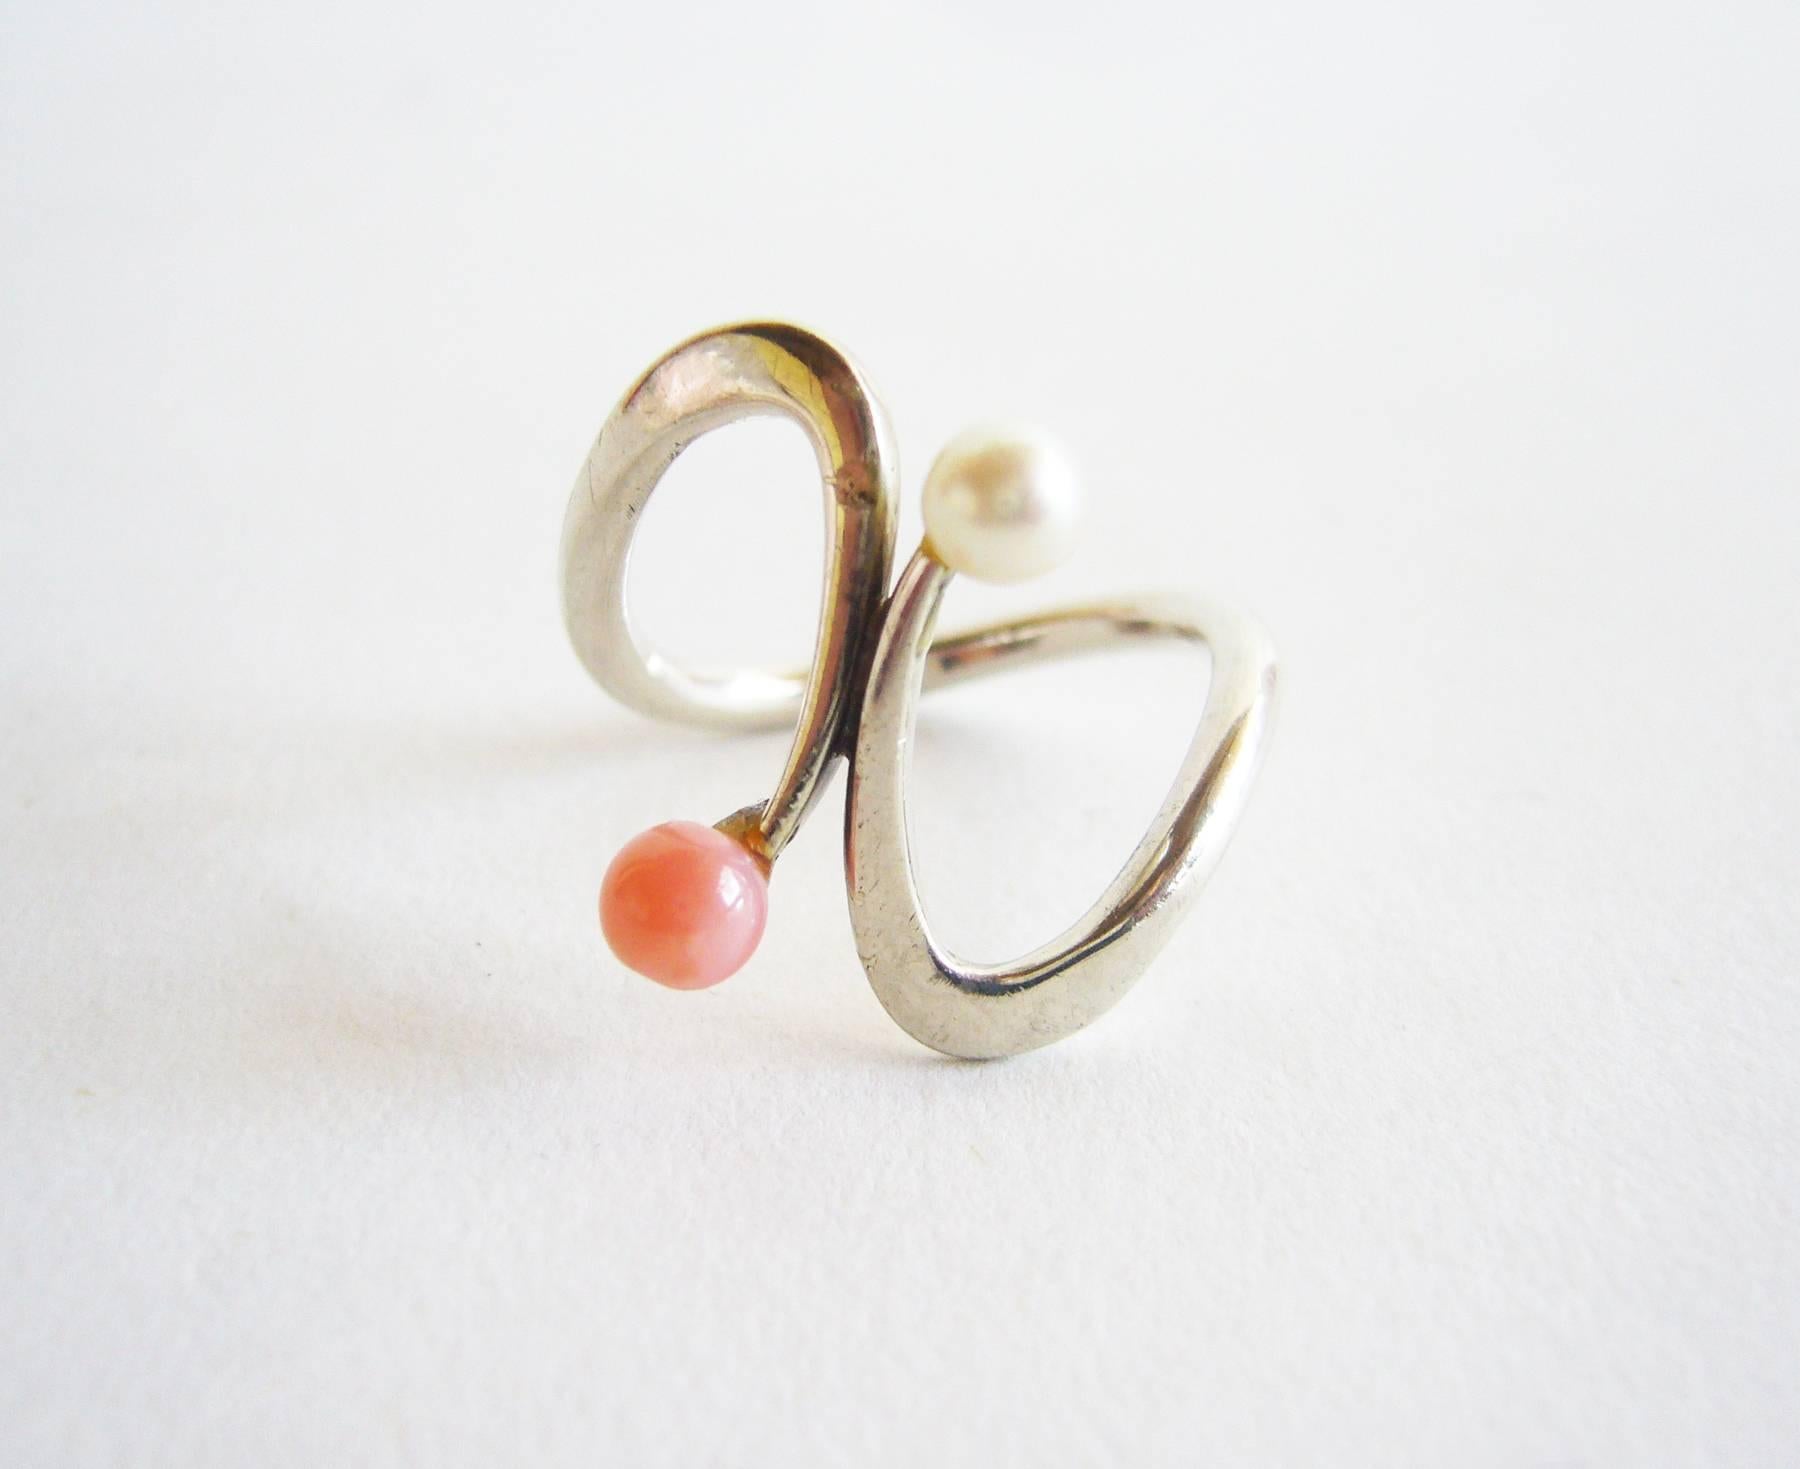 Rare, handmade sterling silver, coral and pearl American modernist ring created by Jack Nutting of San Francisco.  Ring is a finger size 5.5 - 6 and is unsigned.  From the estate of the artist, Jack Nutting.  A great, unconventional alternate to a